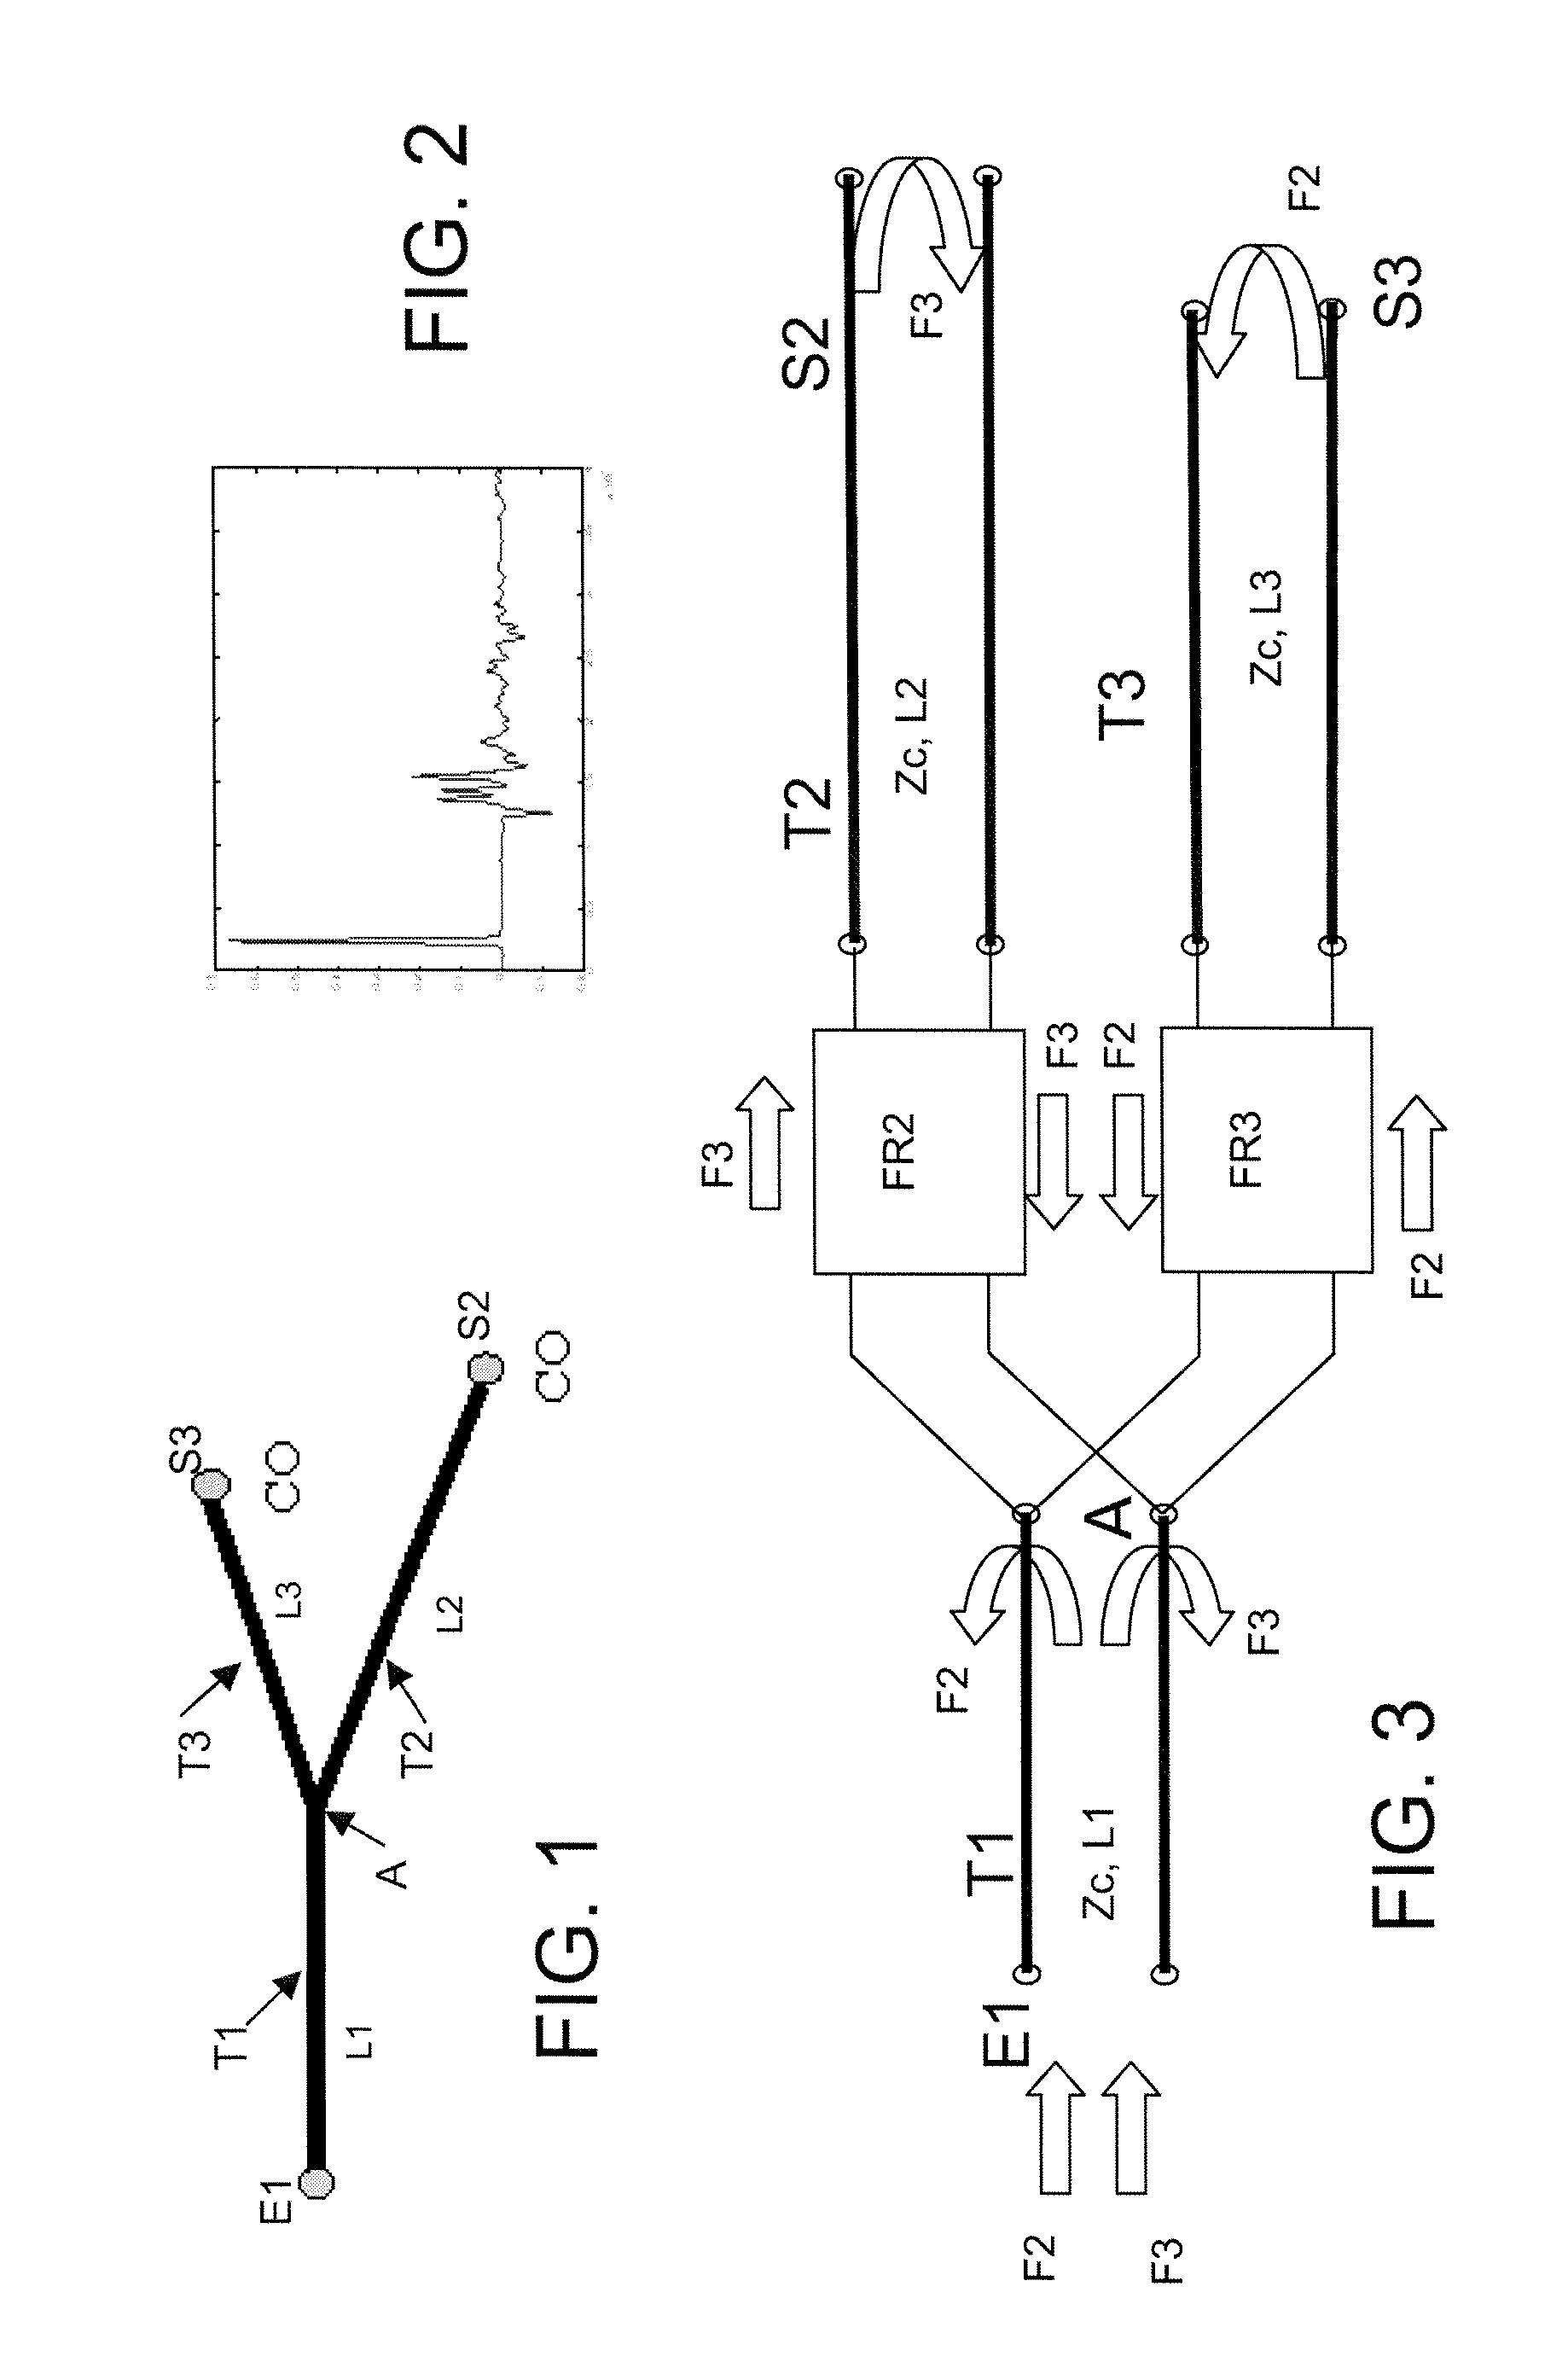 Method and device for analyzing electric cable networks